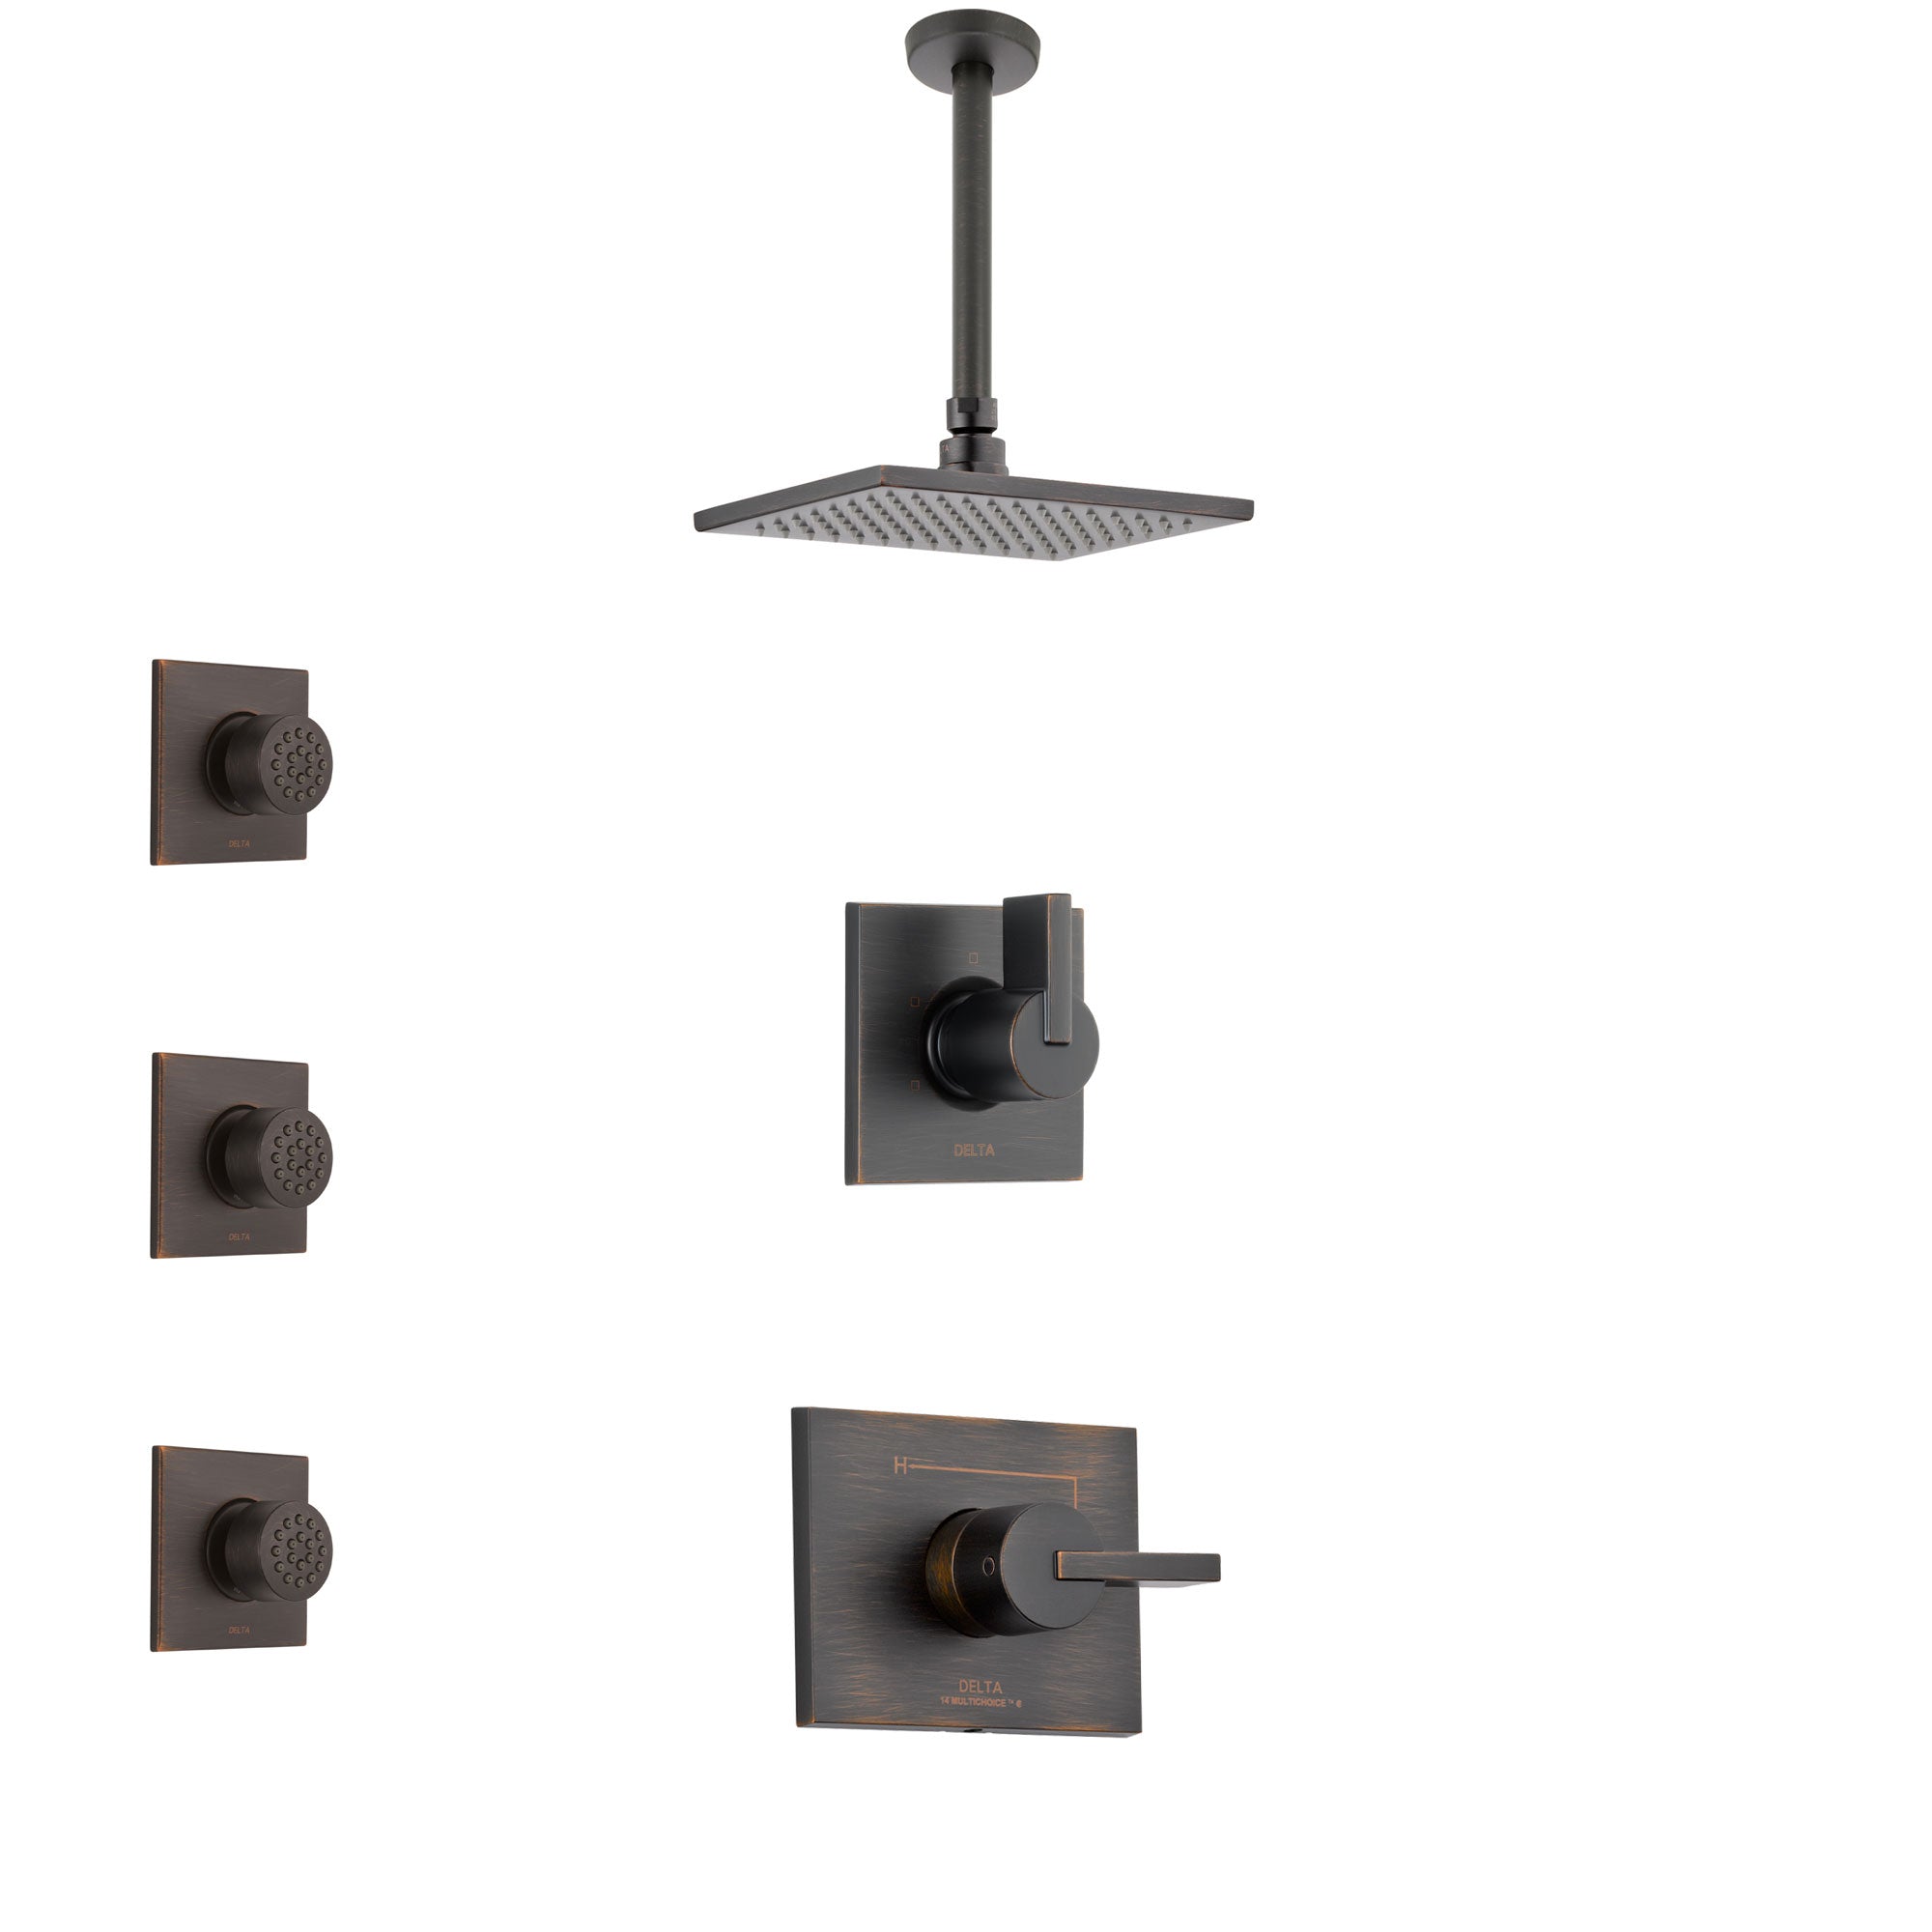 Delta Vero Venetian Bronze Finish Shower System with Control Handle, 3-Setting Diverter, Ceiling Mount Showerhead, and 3 Body Sprays SS1453RB4